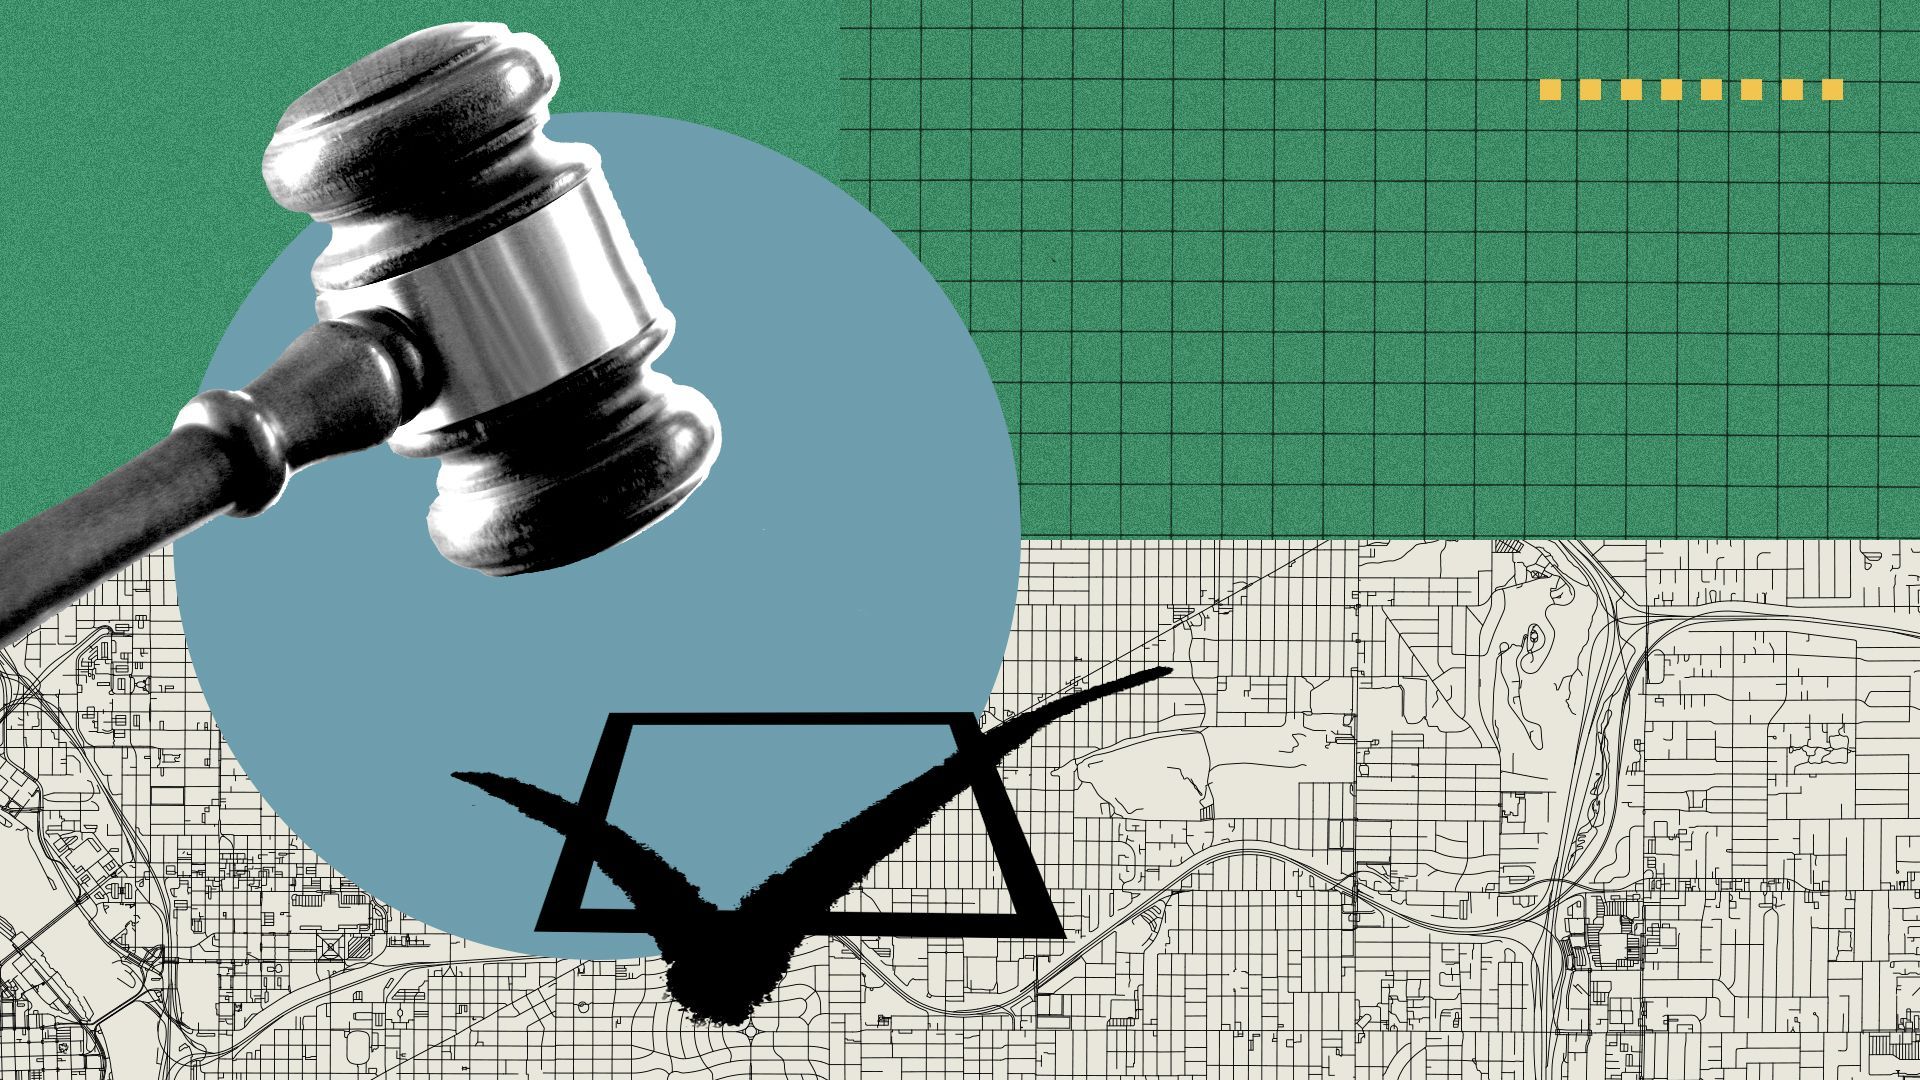 Photo illustration of a gavel hovering above a checkmark inside a circle with a grid and the map of Portland in the background.